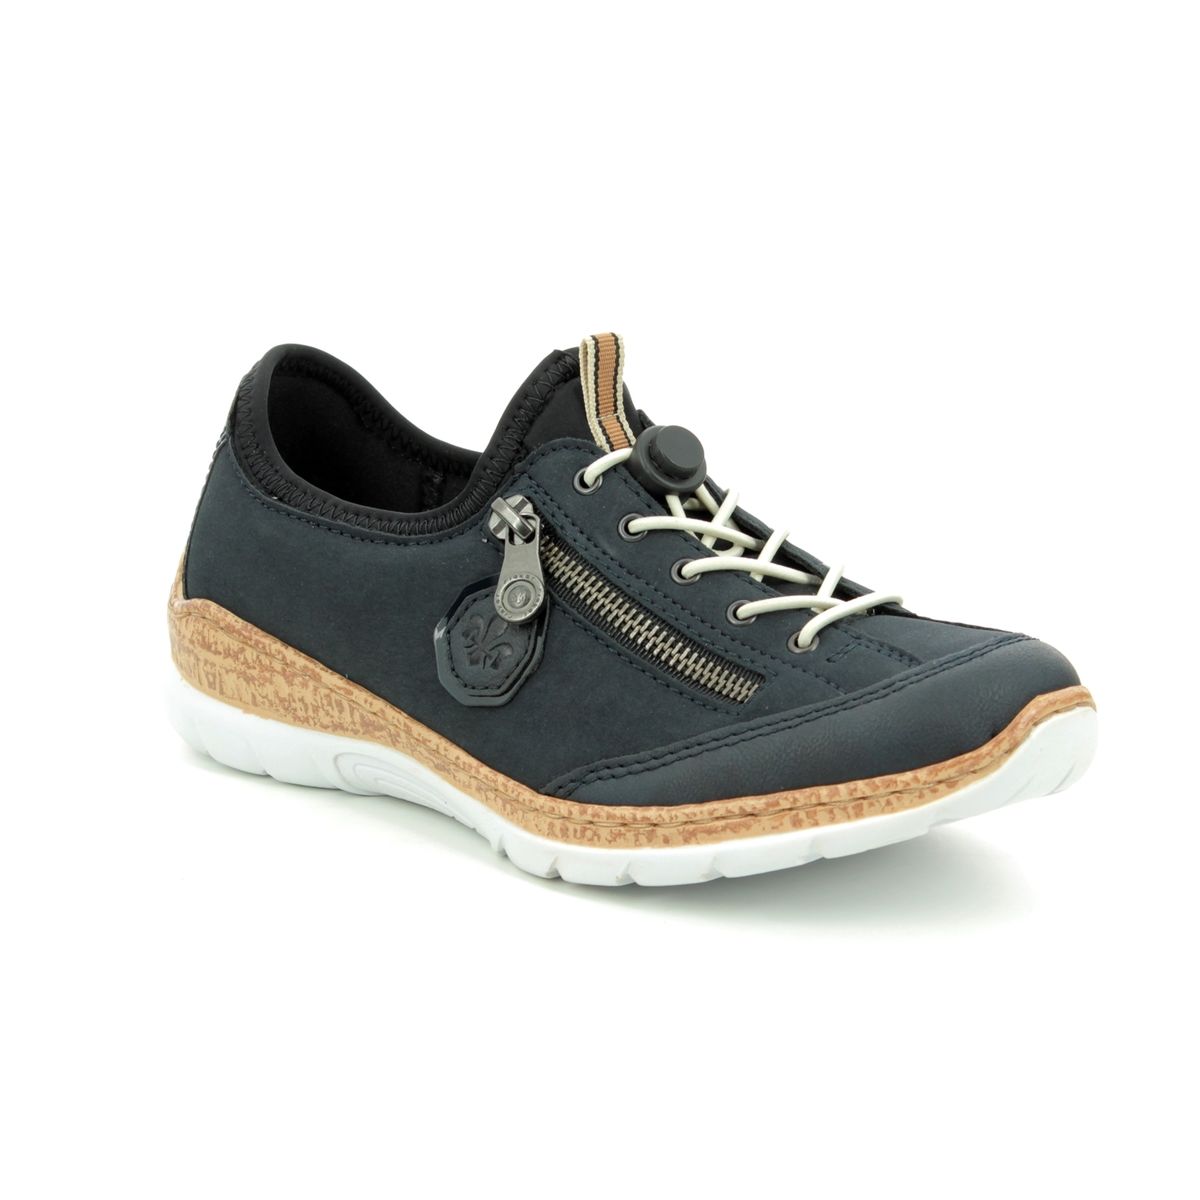 Rieker Empirico Navy Womens Lacing Shoes N4263-14 In Size 40 In Plain Navy